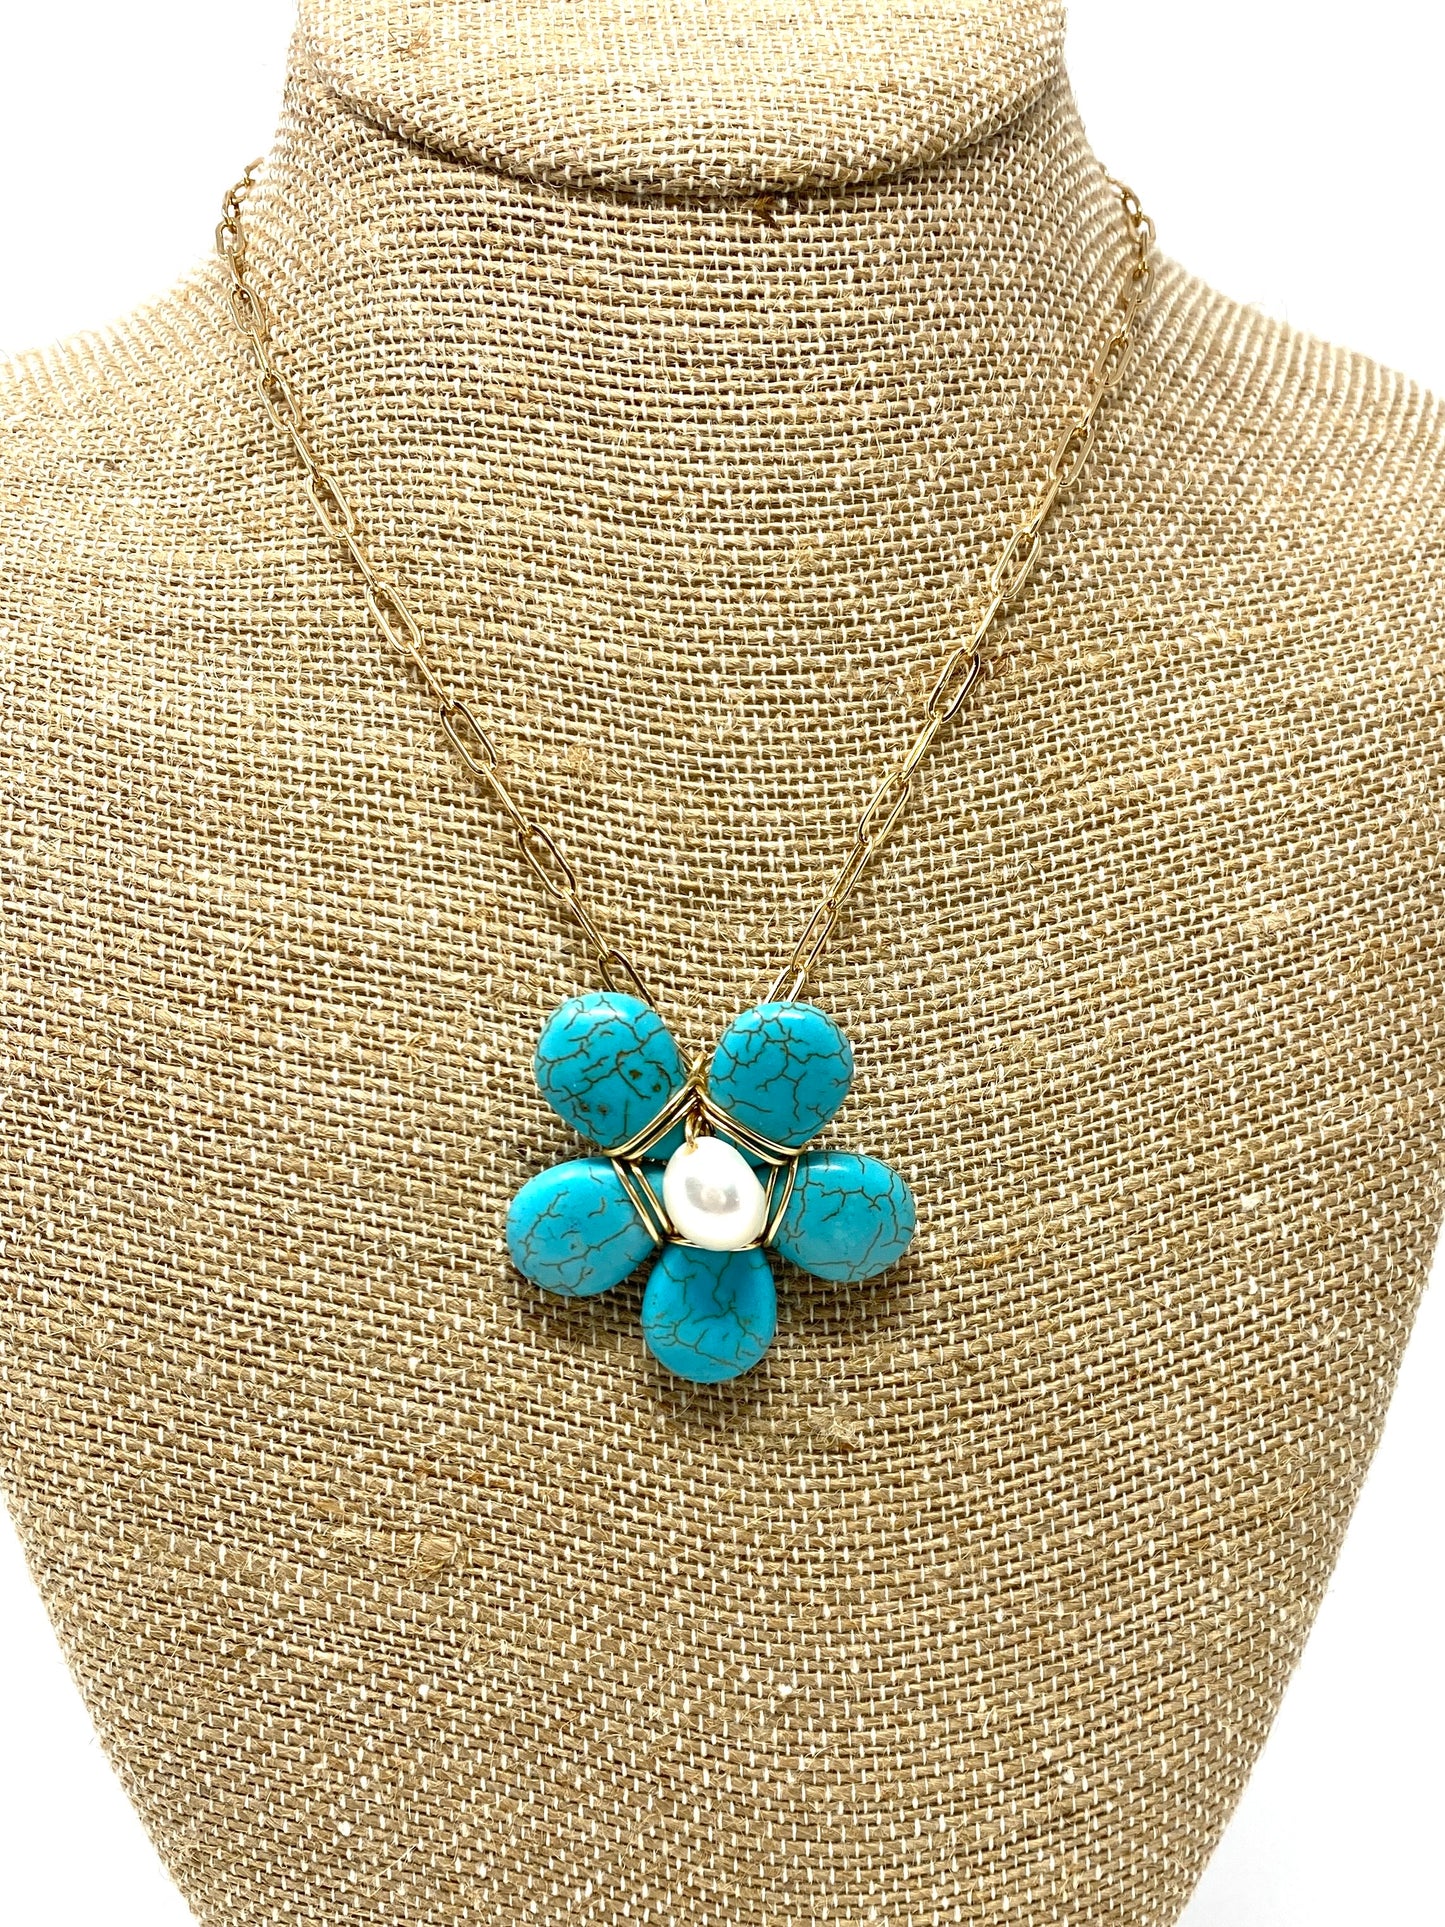 Gold Filled Chain Necklace With Turquoise and Pearl Flower Pendant